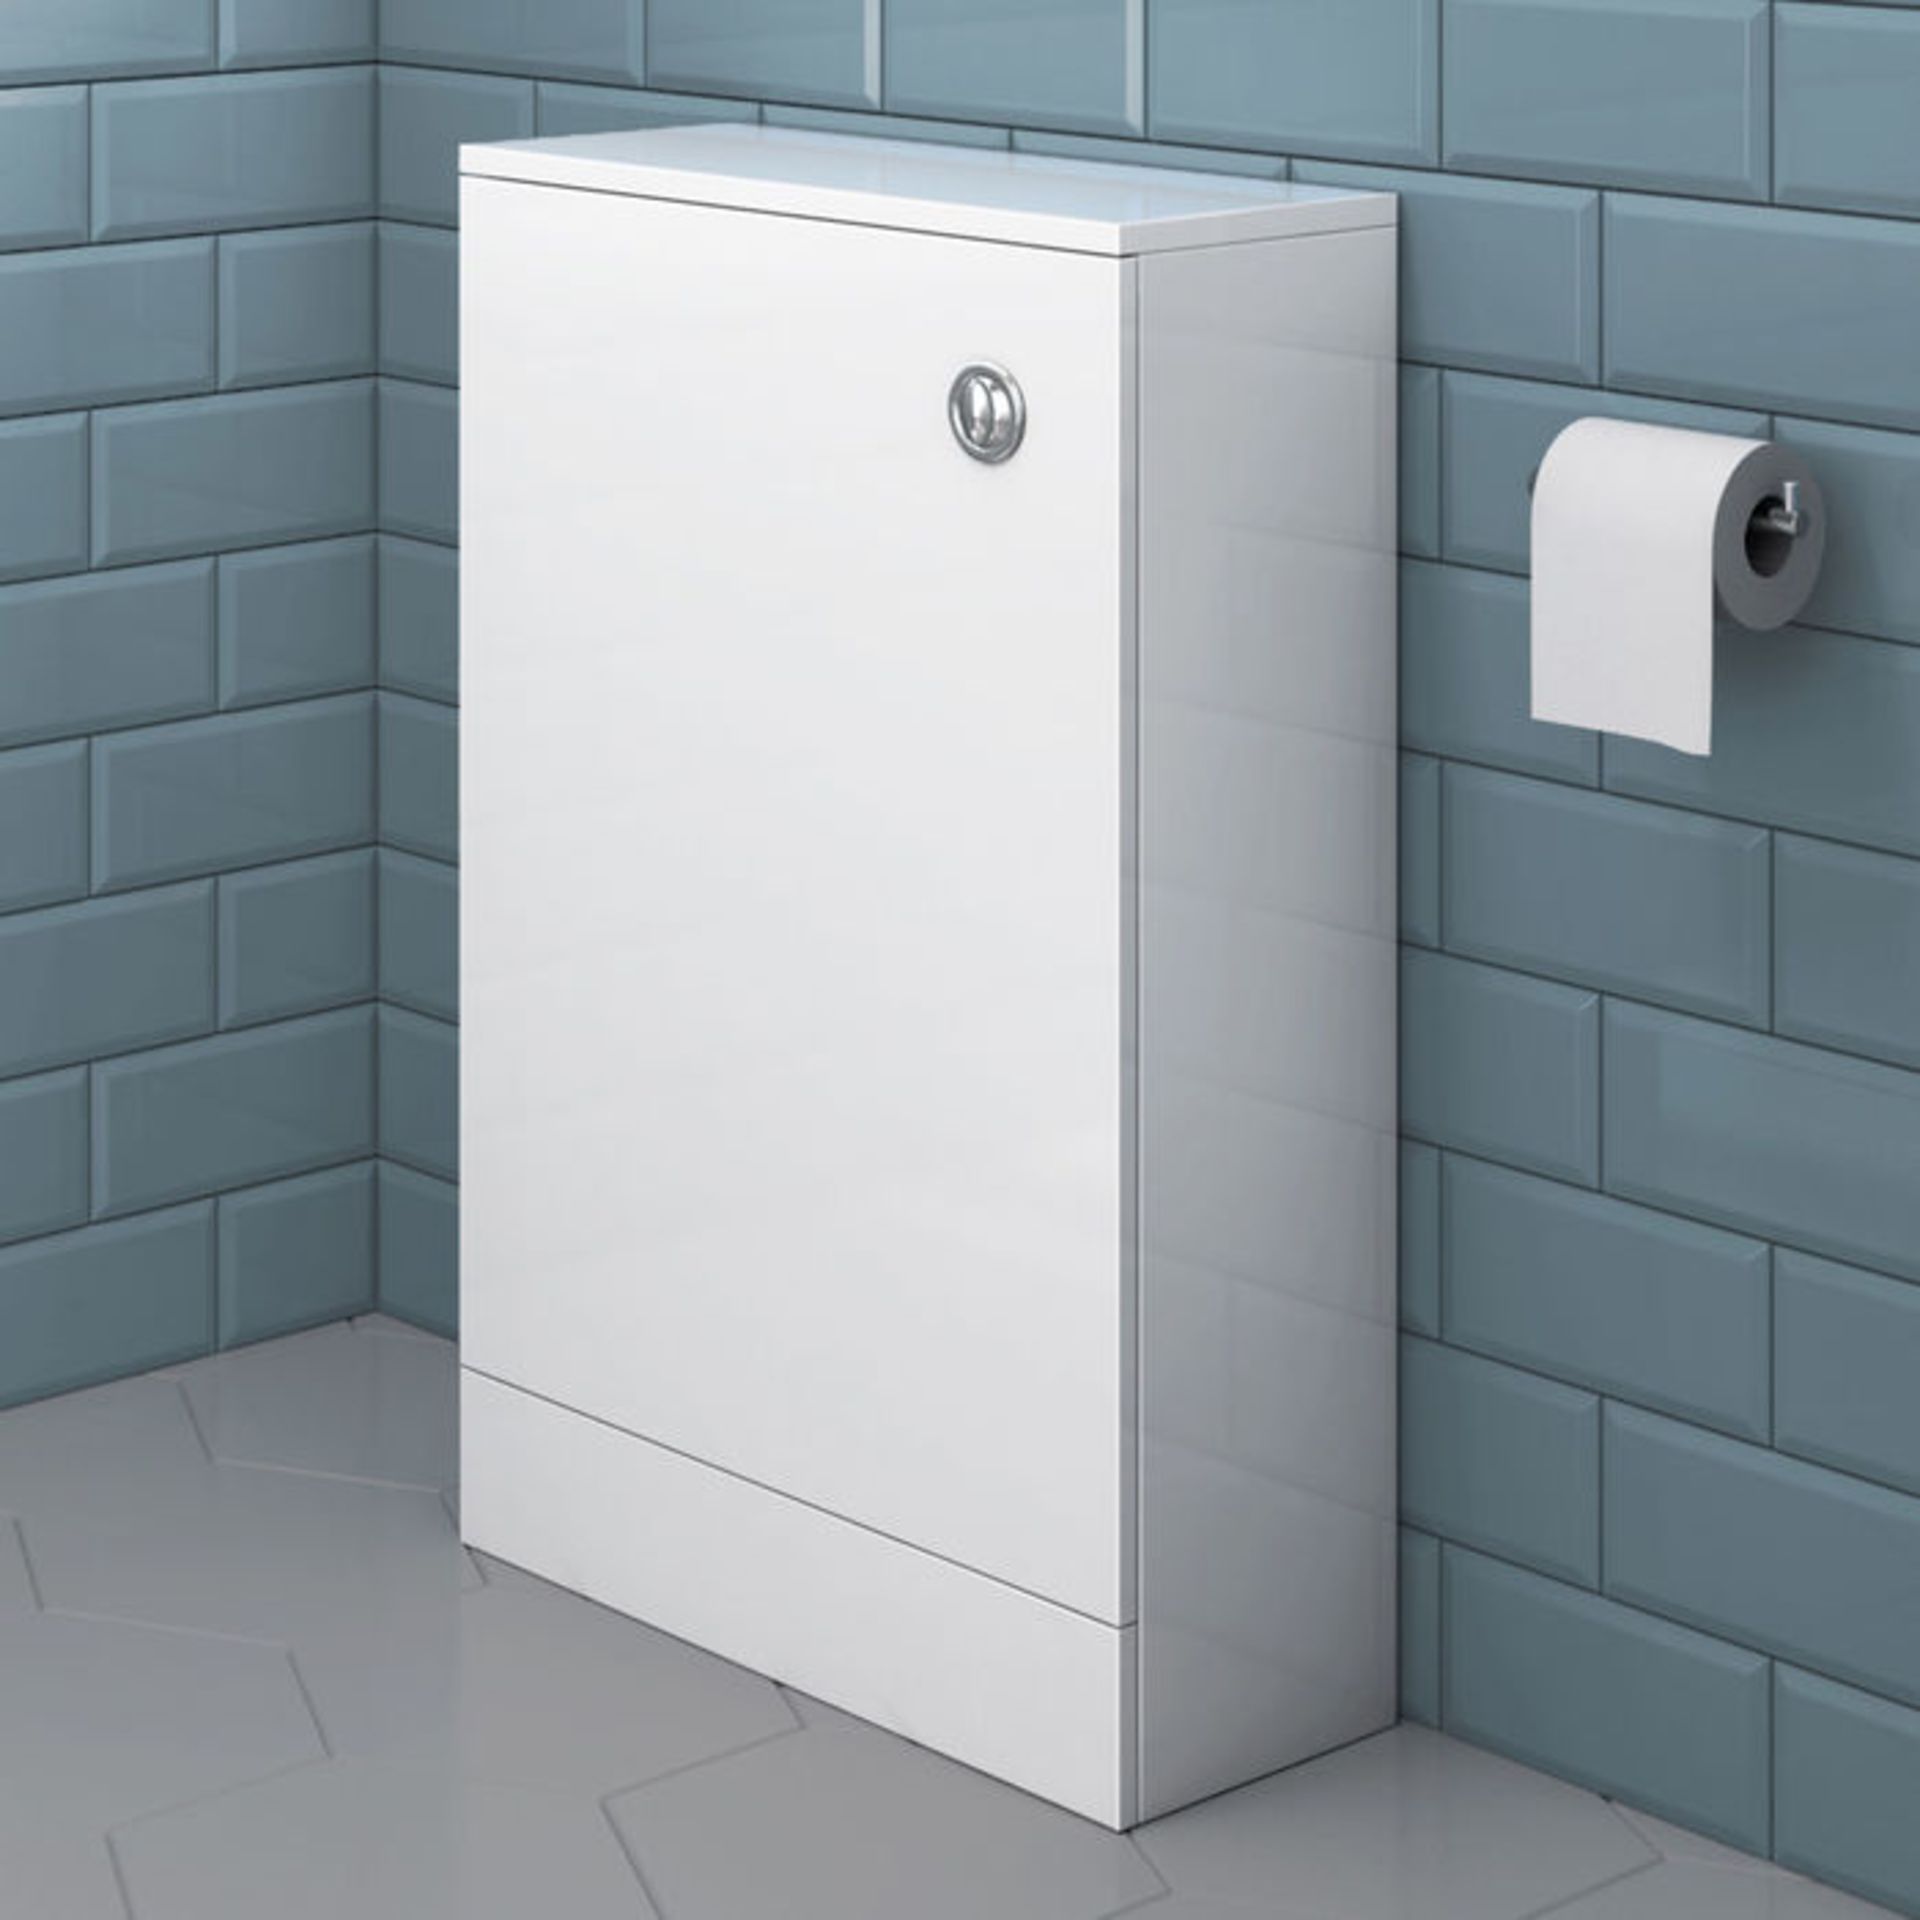 (TT111) 500mm Slimline Gloss White Back To Wall Toilet Unit. Engineered with everyday use in mi...